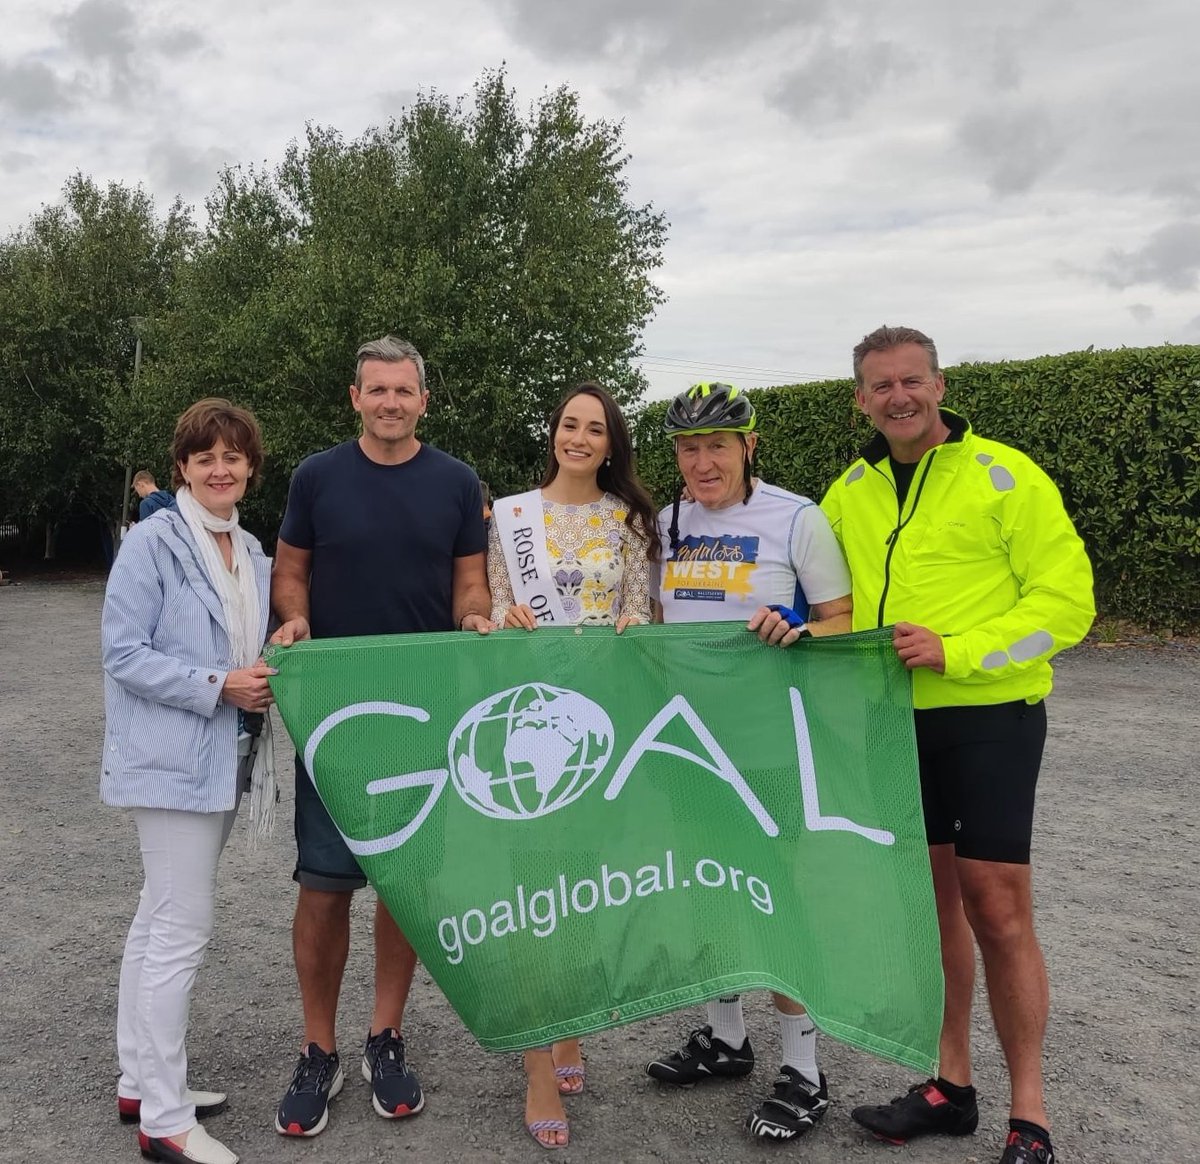 Huge thanks to all who came to Tralee to #PedalWest for GOAL's humanitarian response in #Ukraine Thanks also to 2019 Rose of Tralee Sinead Flanagan for cheering the cyclists on!